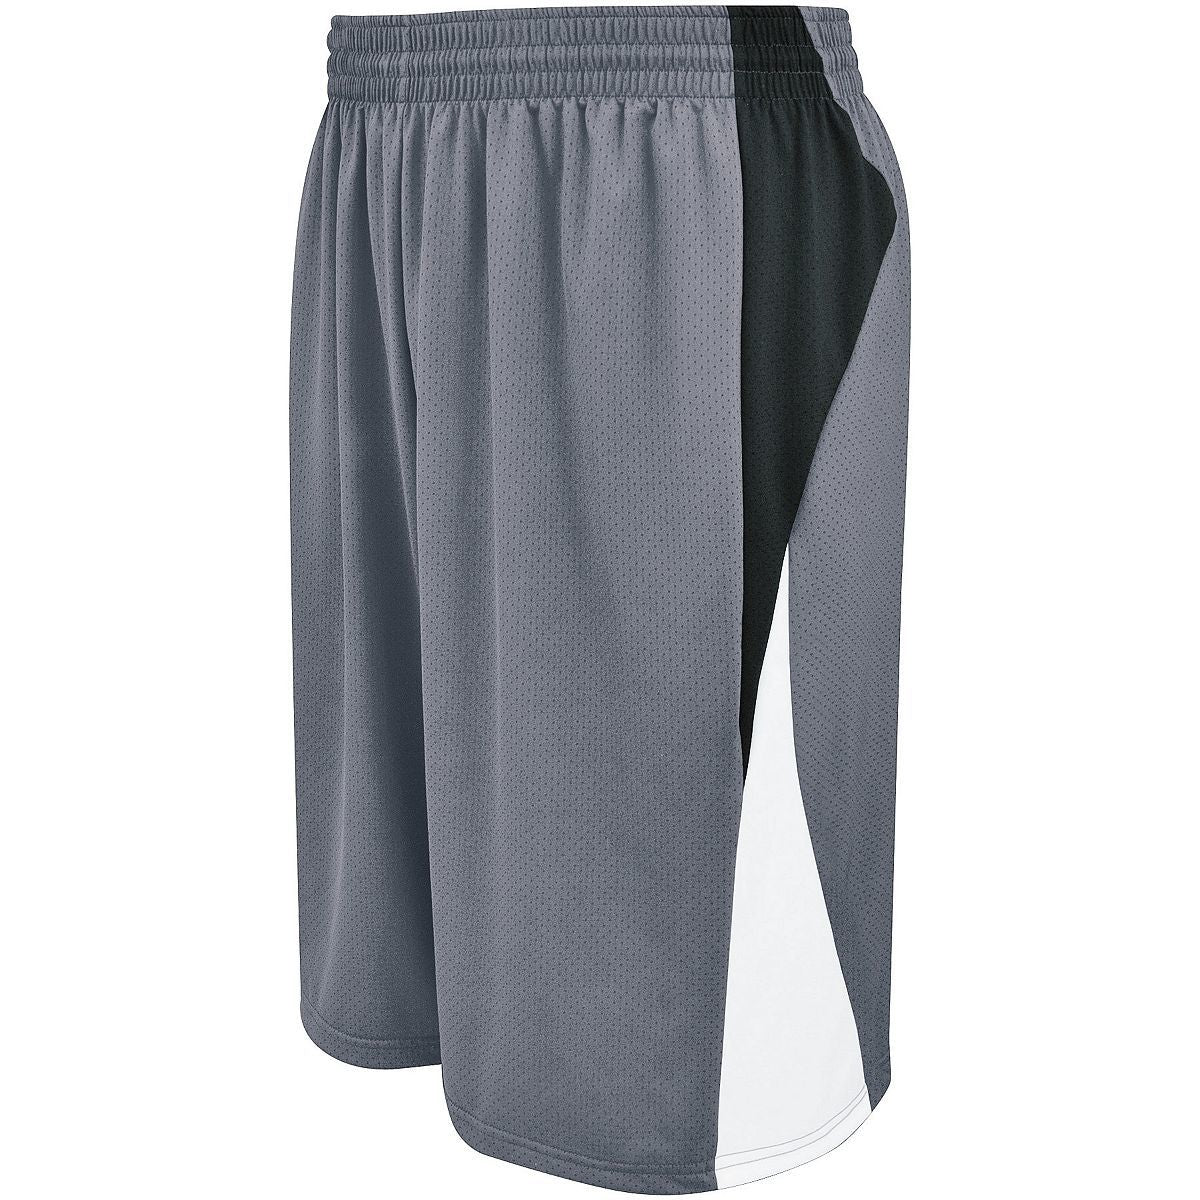 Holloway Campus Reversible Shorts in Graphite/Black/White  -Part of the Adult, Adult-Shorts, Basketball, Holloway, All-Sports, All-Sports-1 product lines at KanaleyCreations.com